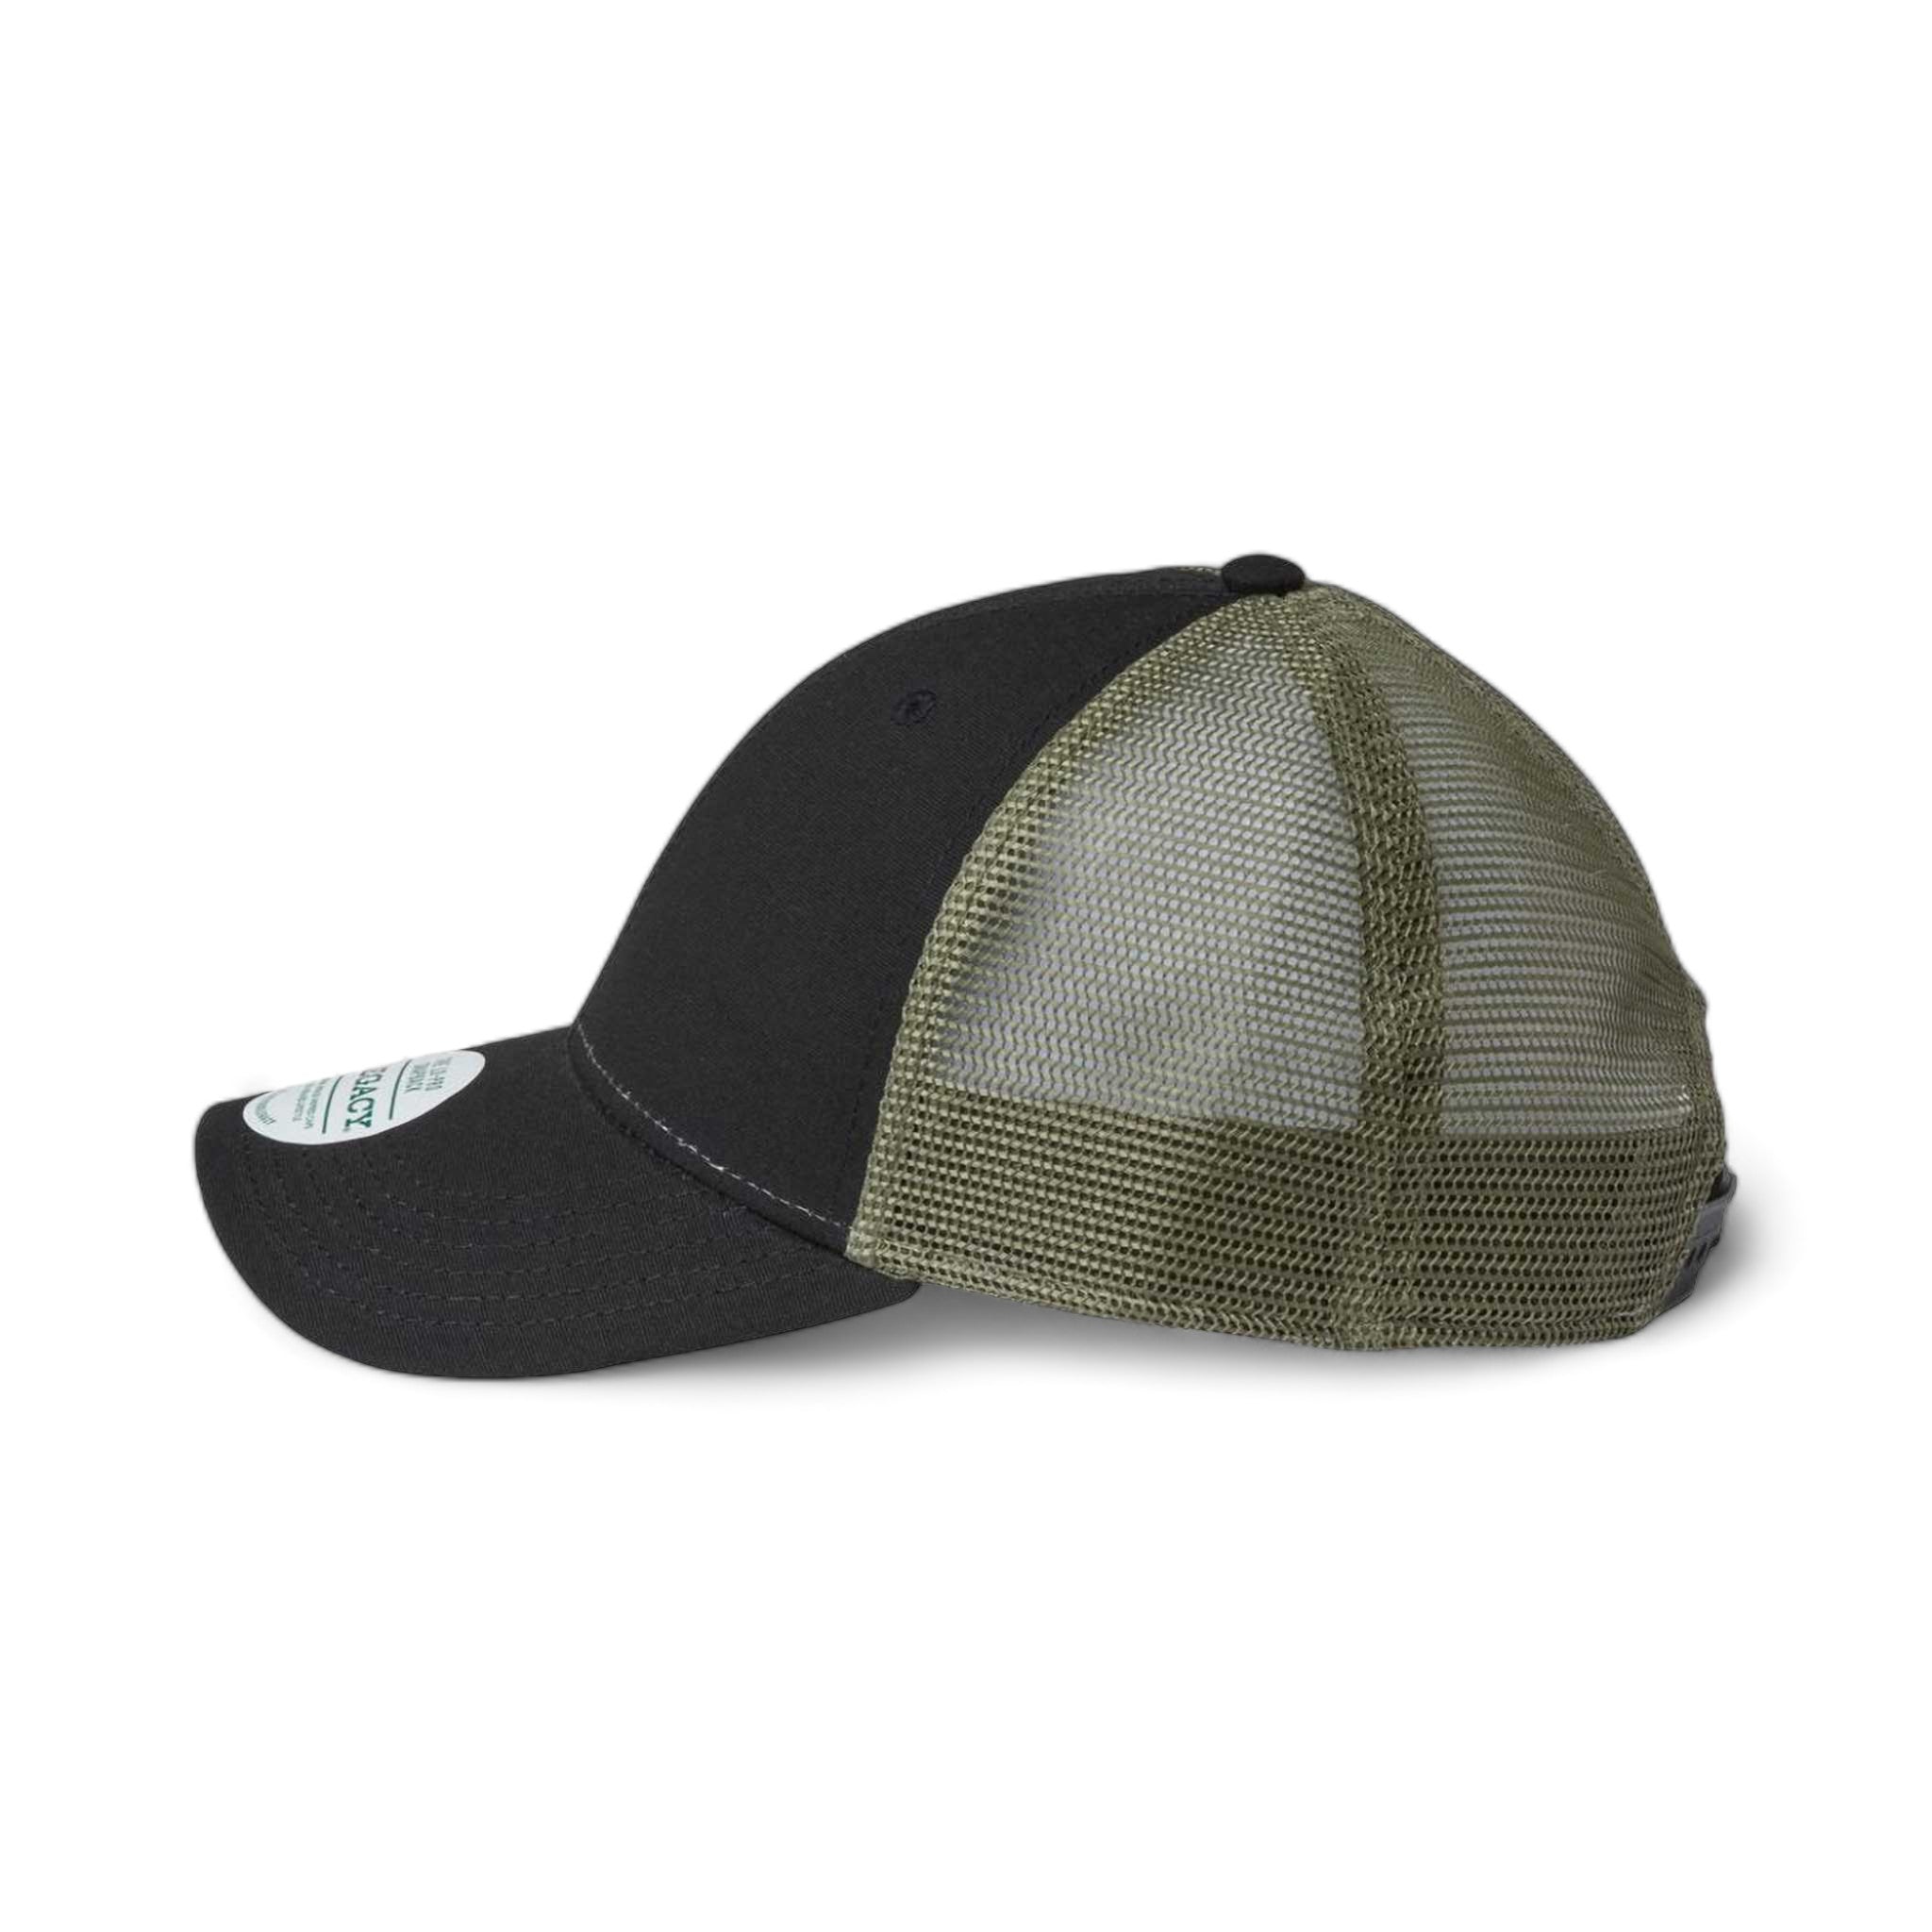 Side view of LEGACY LPS custom hat in black and light olive